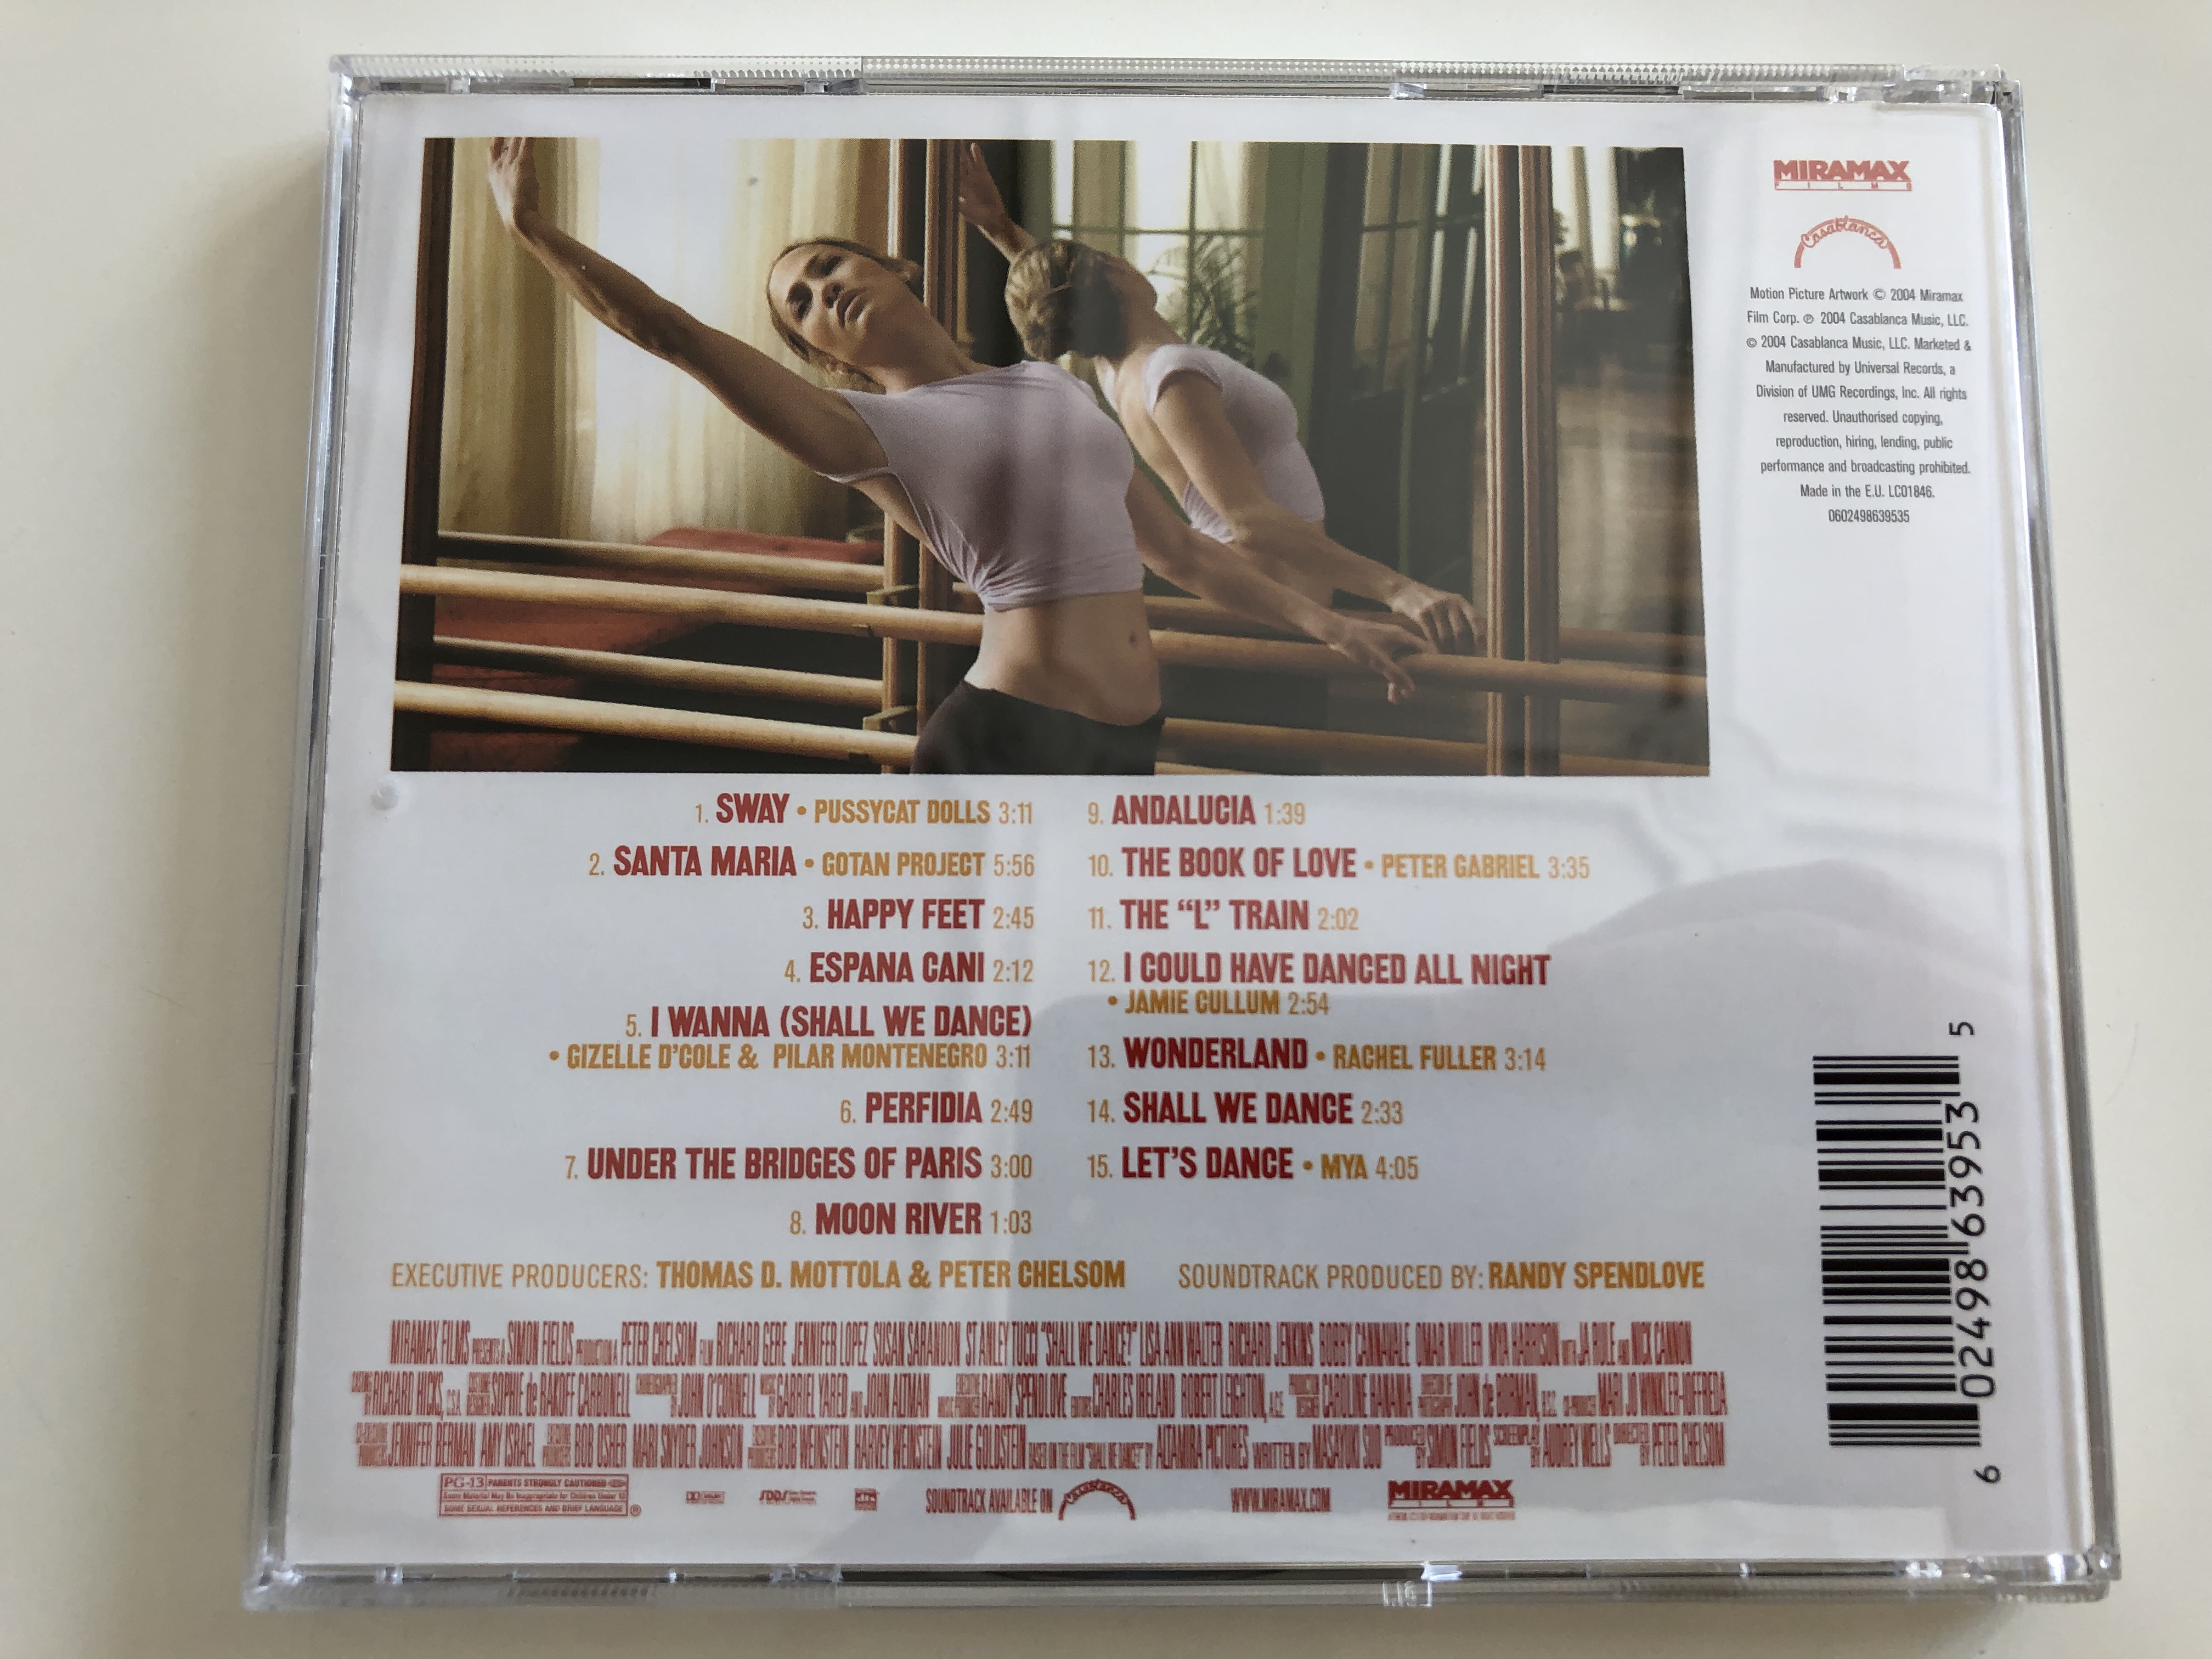 shall-we-dance-music-from-the-motion-picture-audio-cd-2004-soundtrack-produced-by-randy-spendlove-3-.jpg